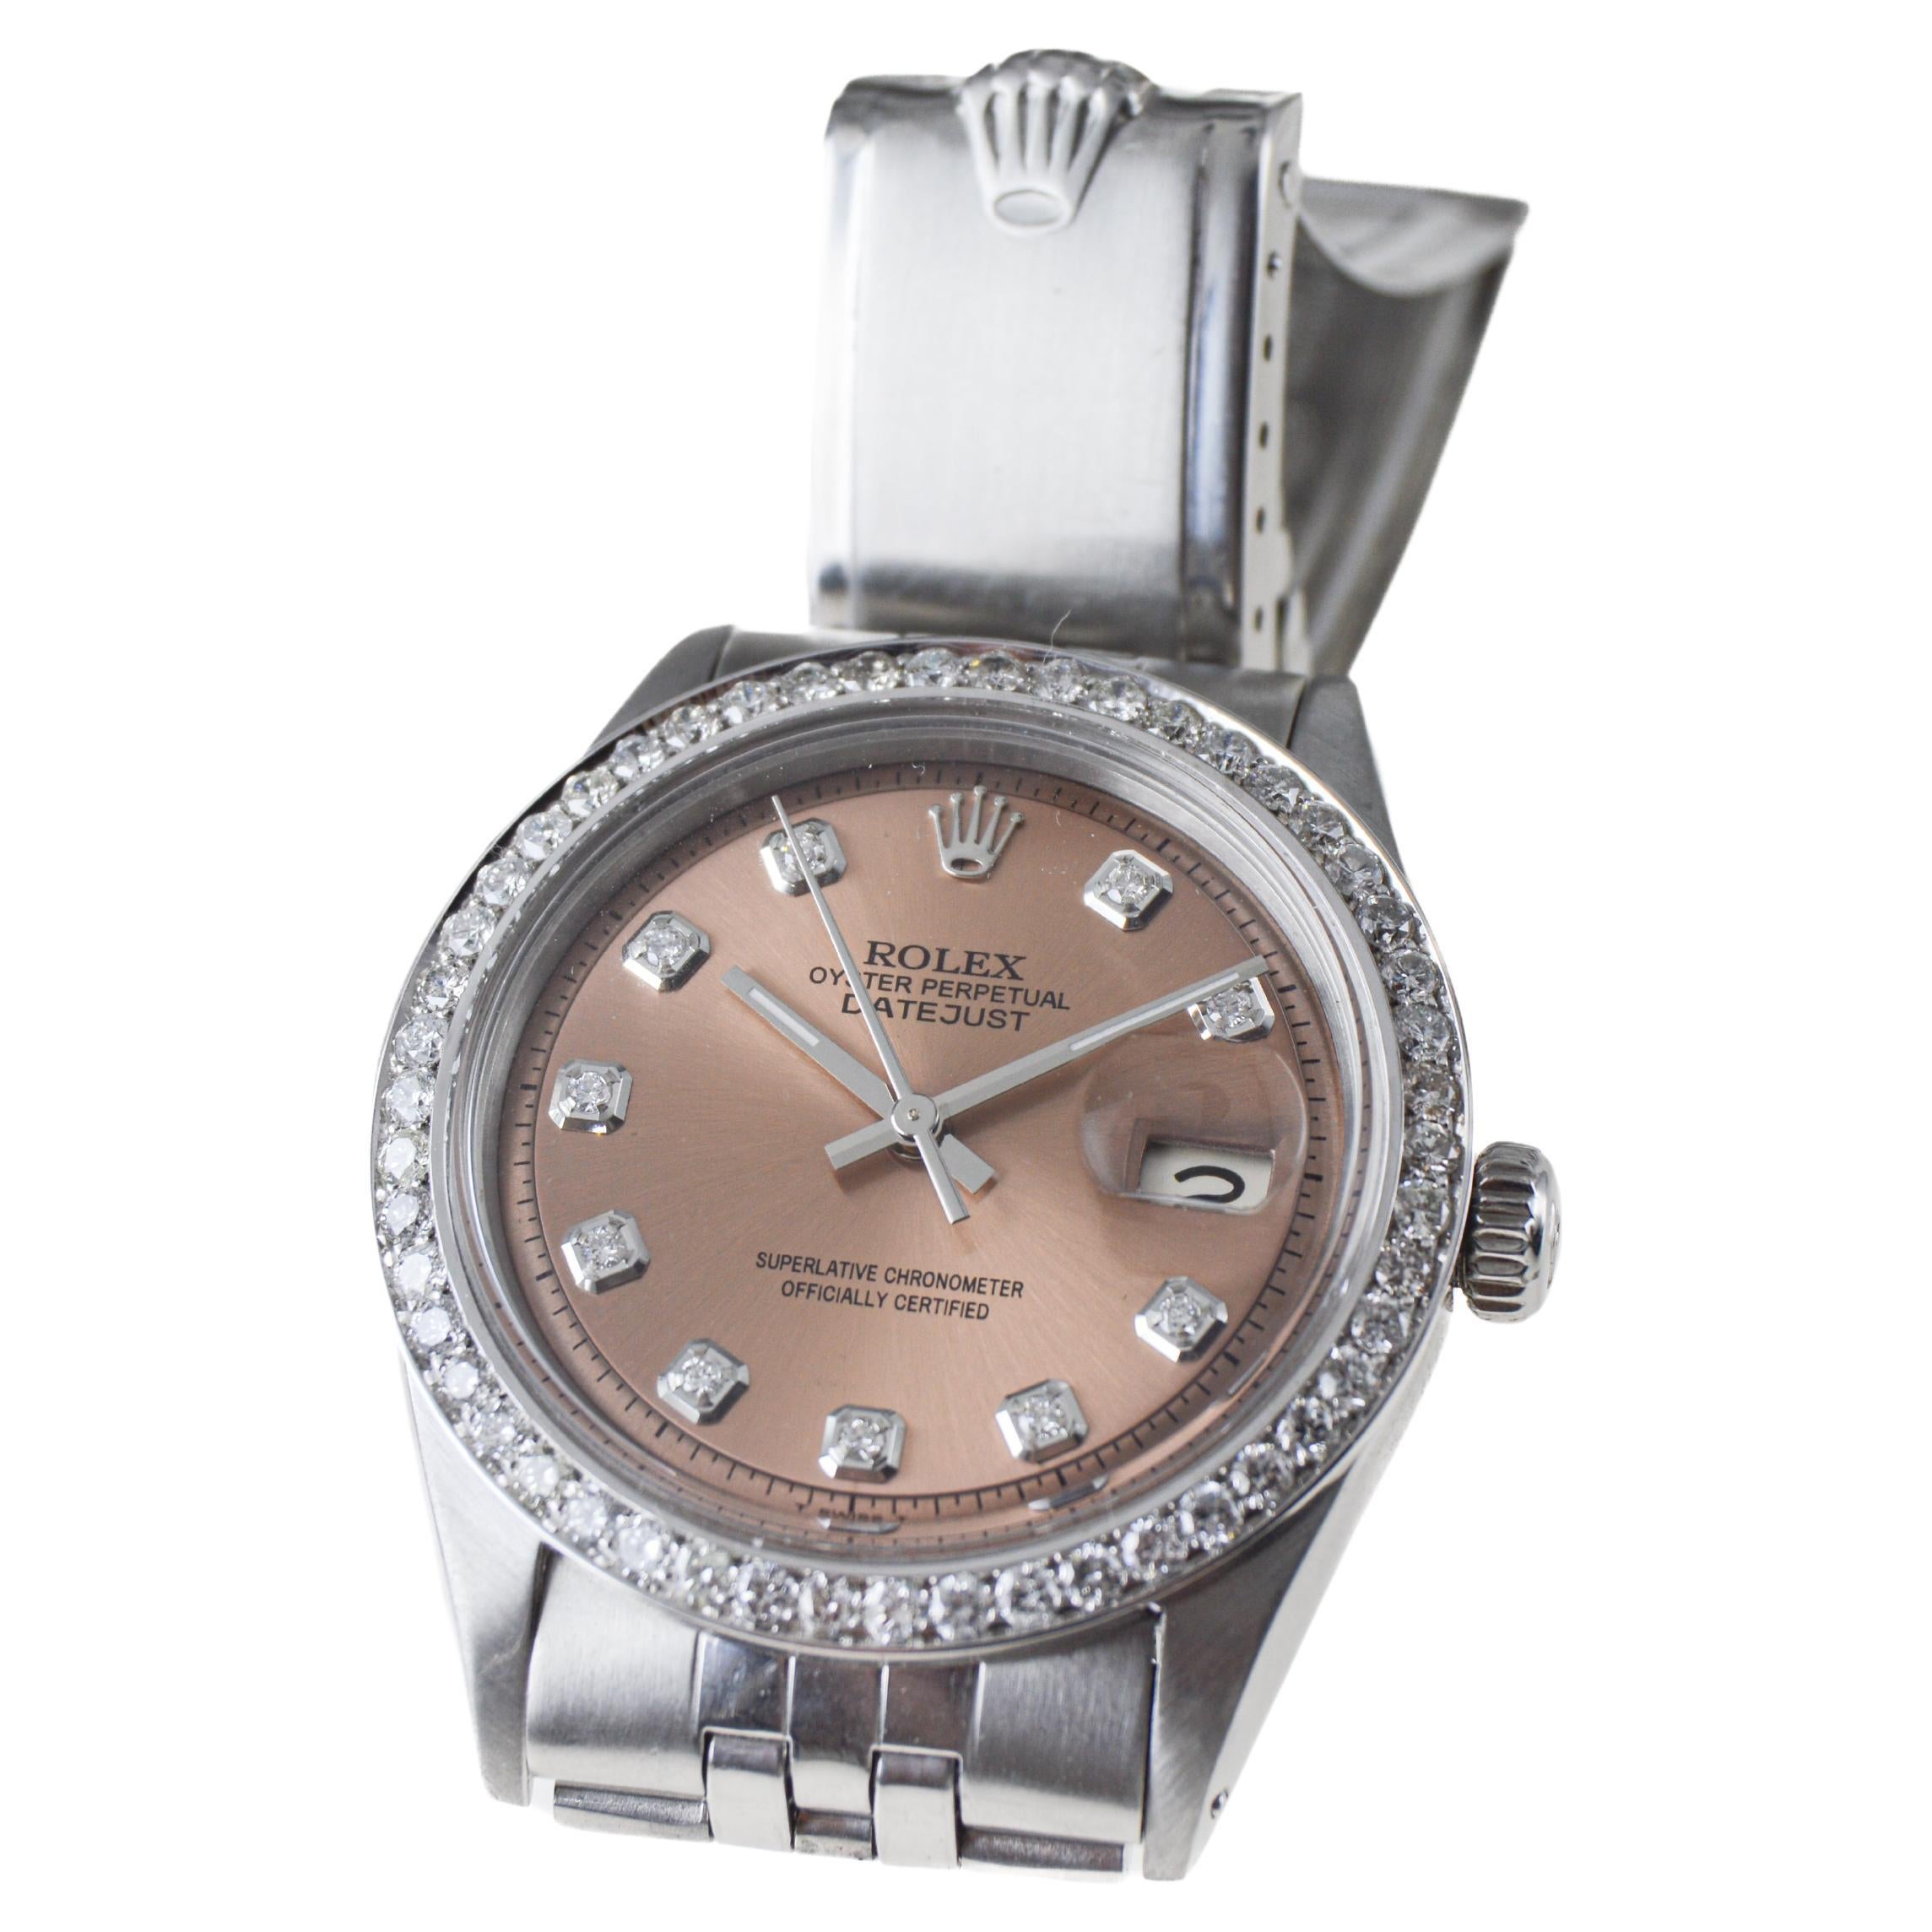 Rolex Stainless Steel Datejust Custom Finished Dial Diamond Bezel, circa 1970's For Sale 2